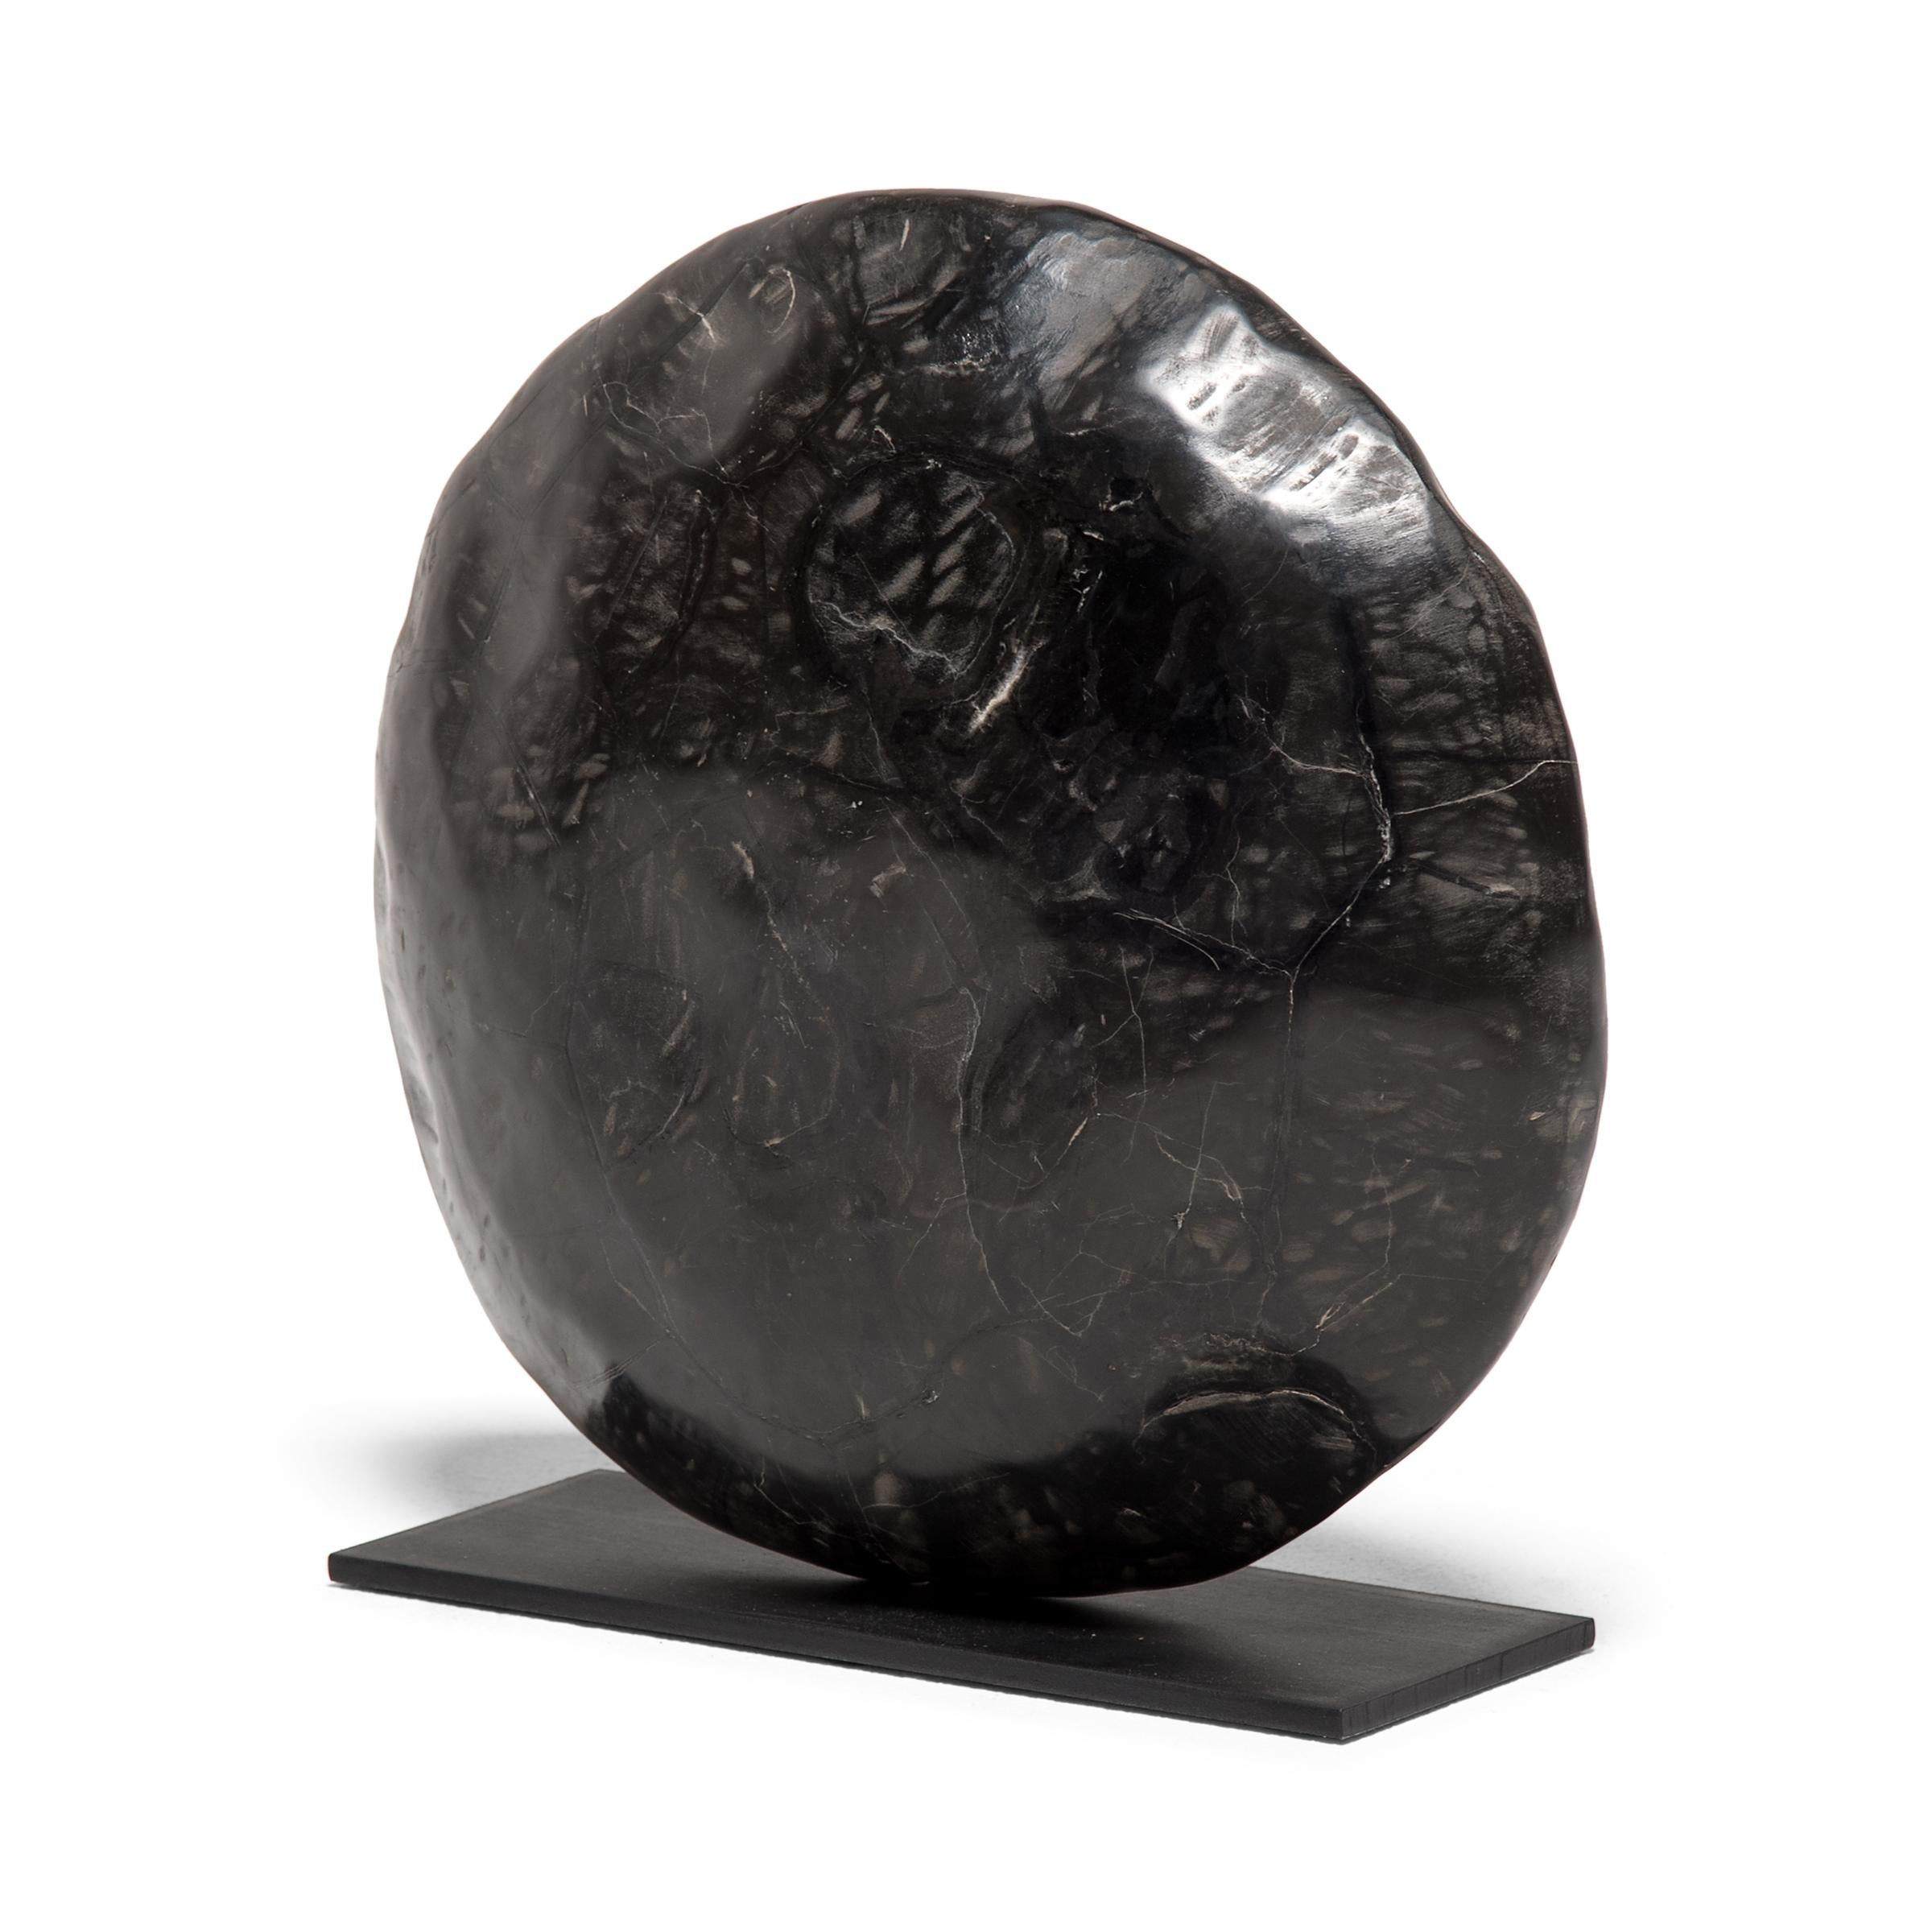 Sourced from Guangxi province, this round stone looks just like the shell of a tortoise, a traditional emblem of longevity. The unusual stone was formed by the cracking of sedimentary stones, which was then filled by deposits of another mineral. The